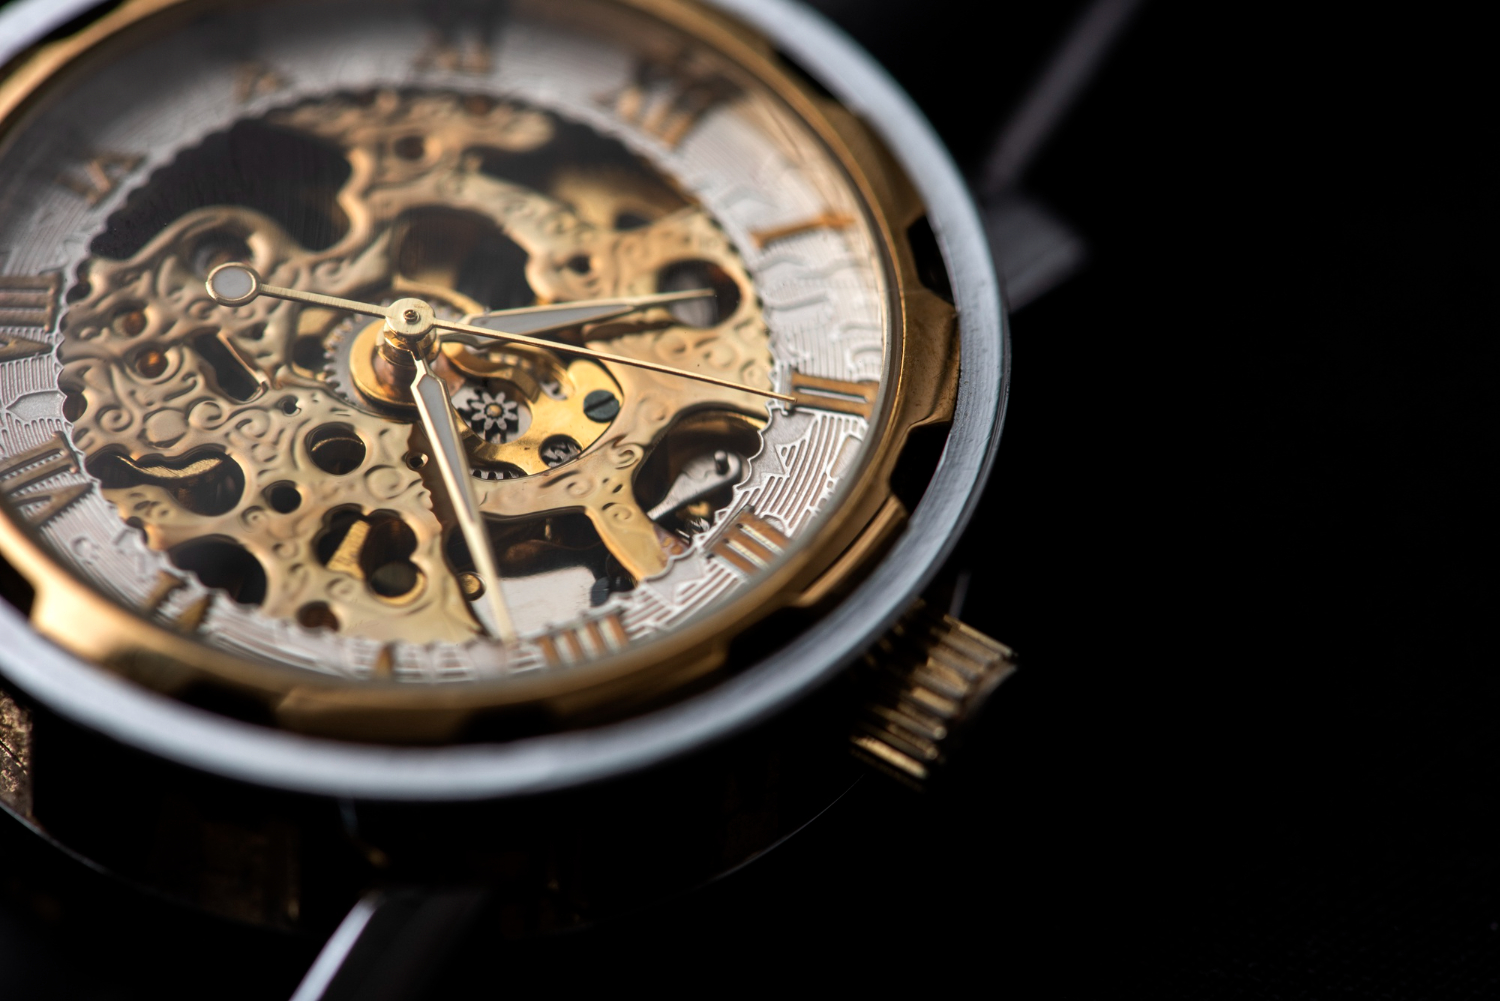 How Often Should You Service Your Vintage Watch?